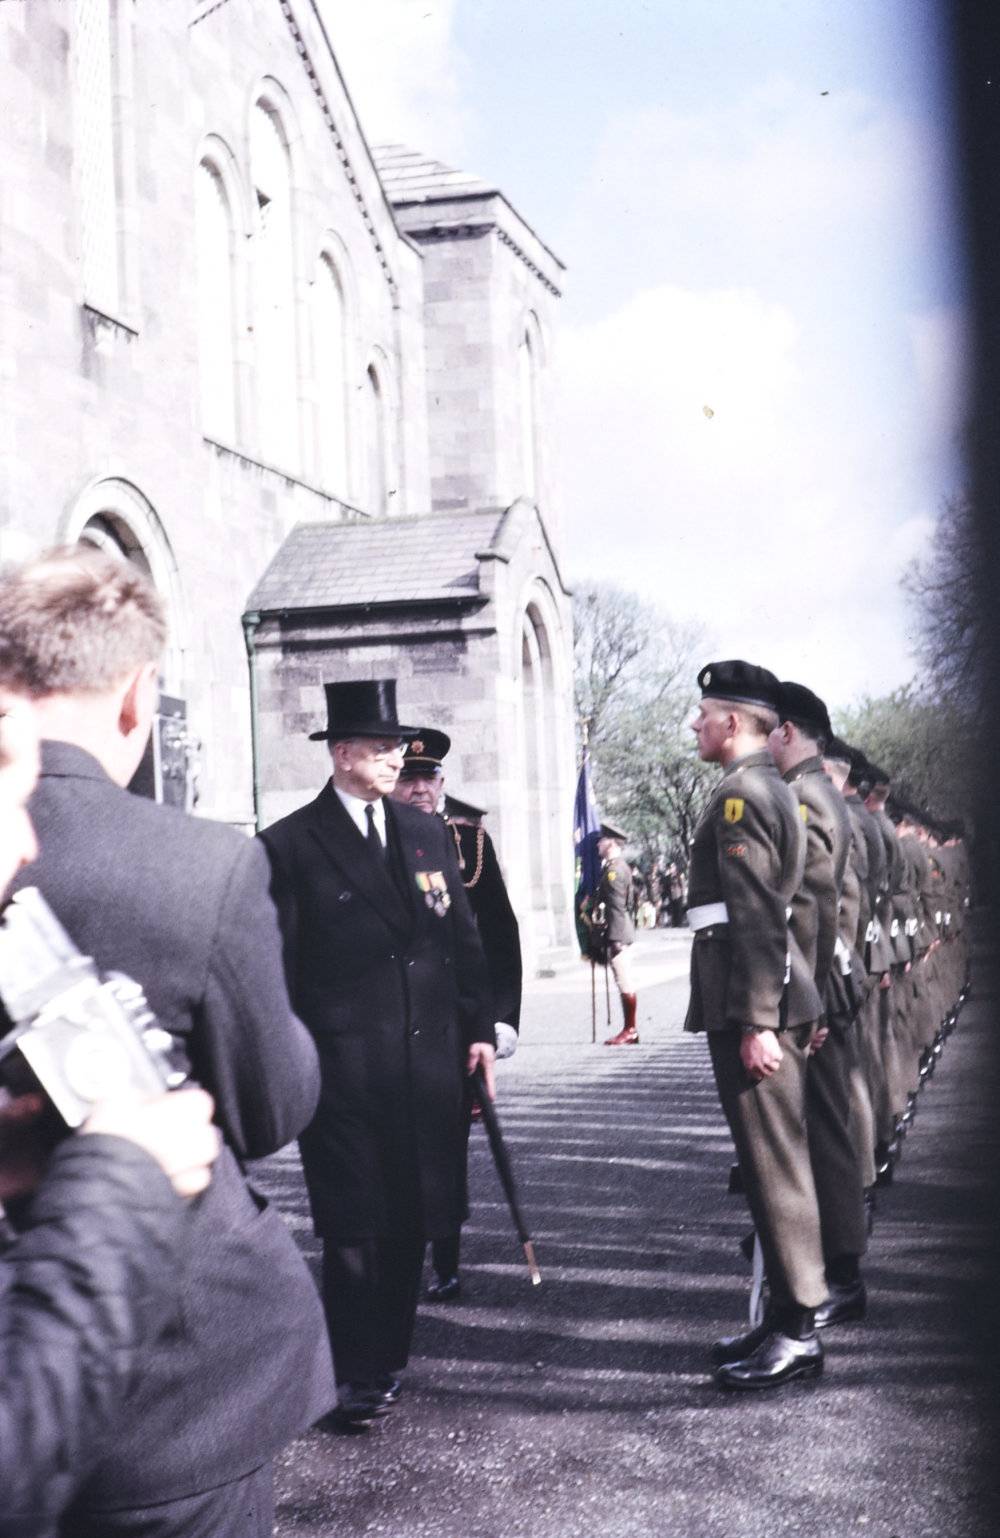 President Eamon de Valera inspects the troops at an anniversary event at Arbour Hill in 1966. National Library of Ireland.